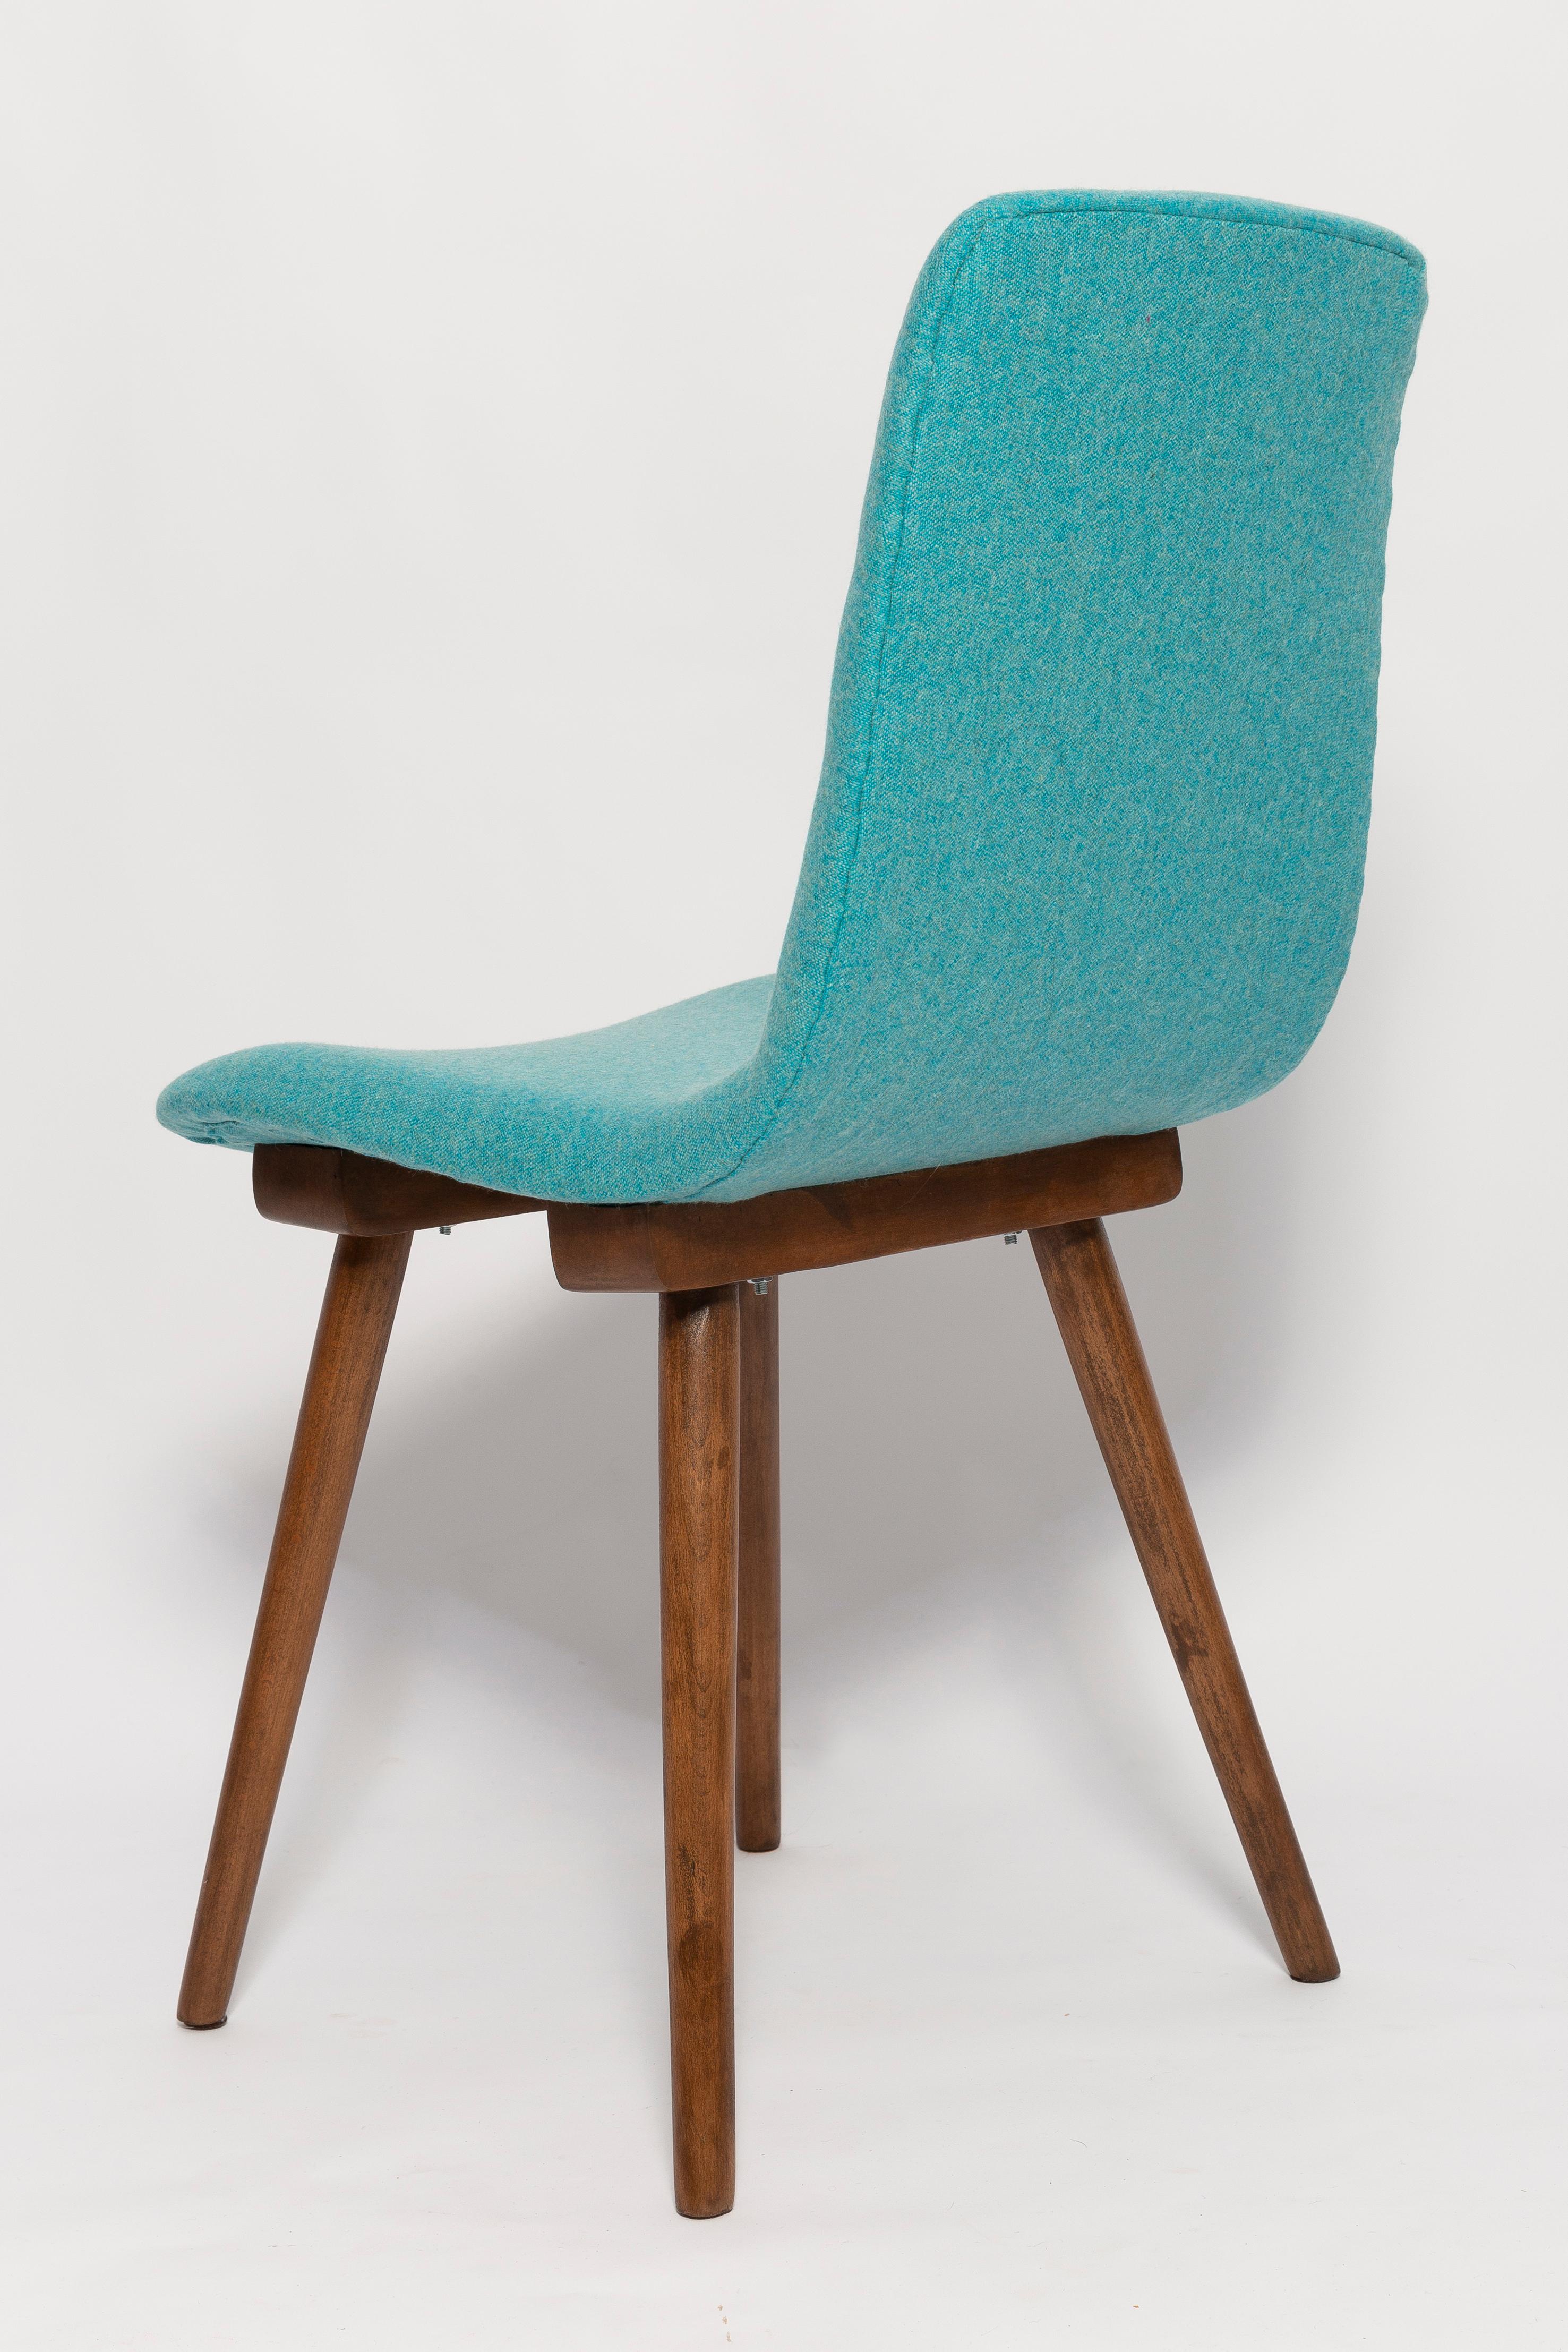 Set of Four Mid Century Wool Chairs, Rajmund Halas, Europe, 1960s For Sale 2